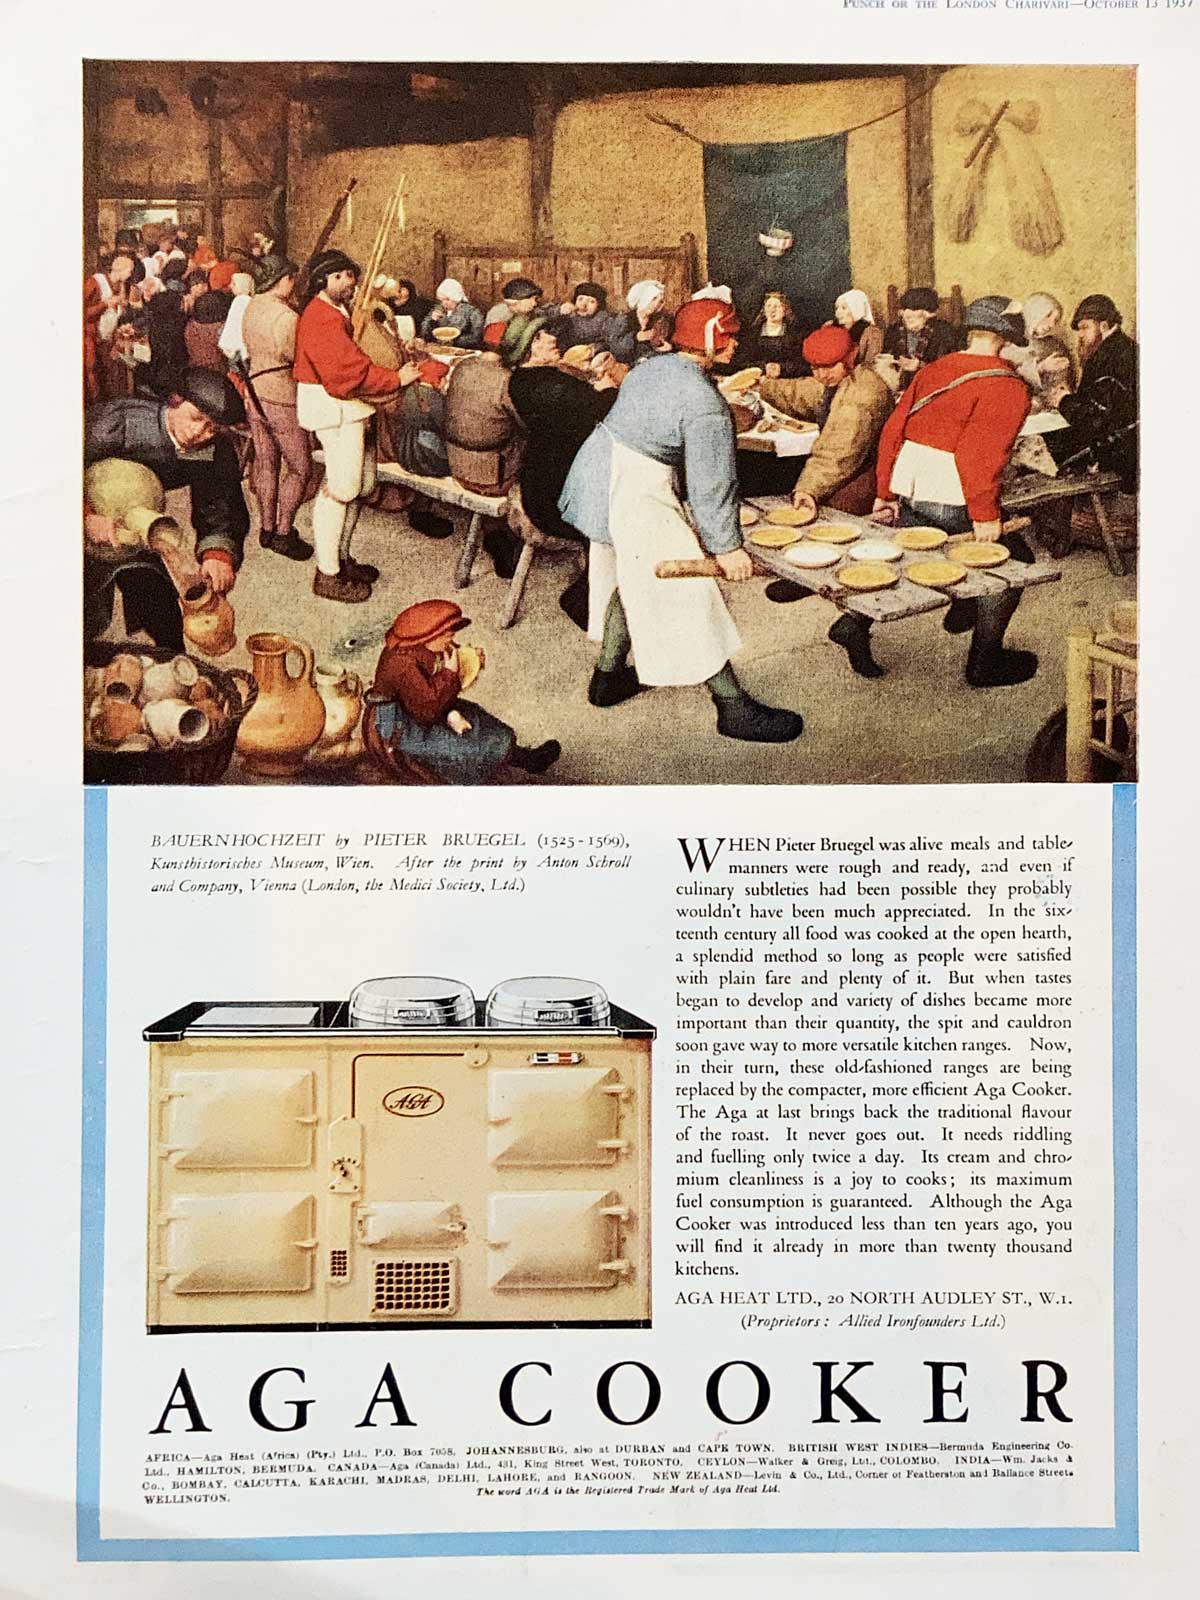 Aga advert from the 1930s